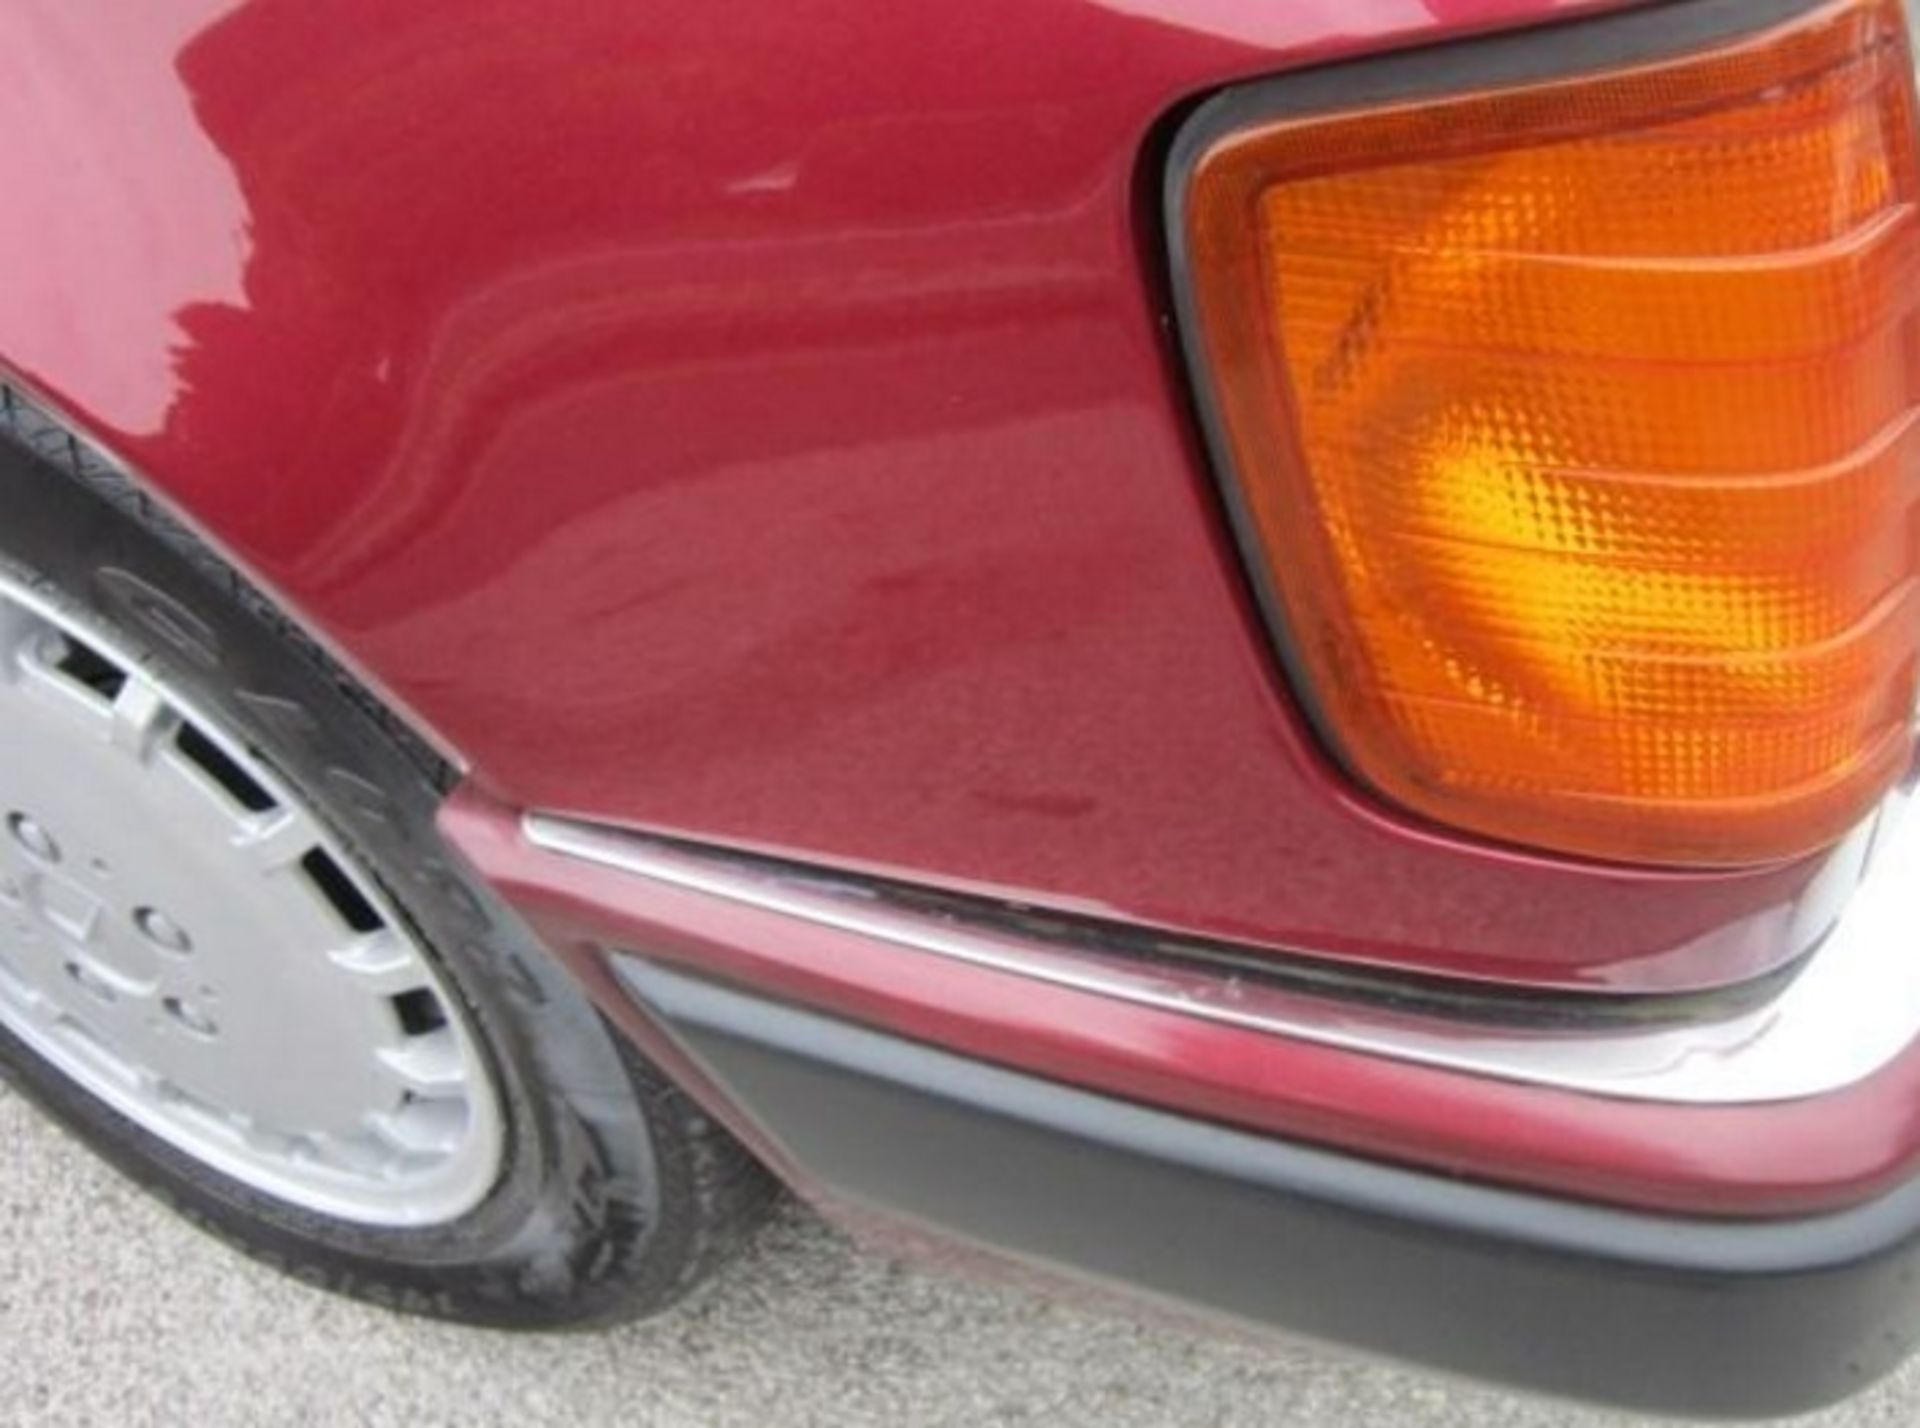 1980 Mercedes-Benz 300 E – 4 Matic (4WD) (Metallic Ruby Red) - Image 7 of 14